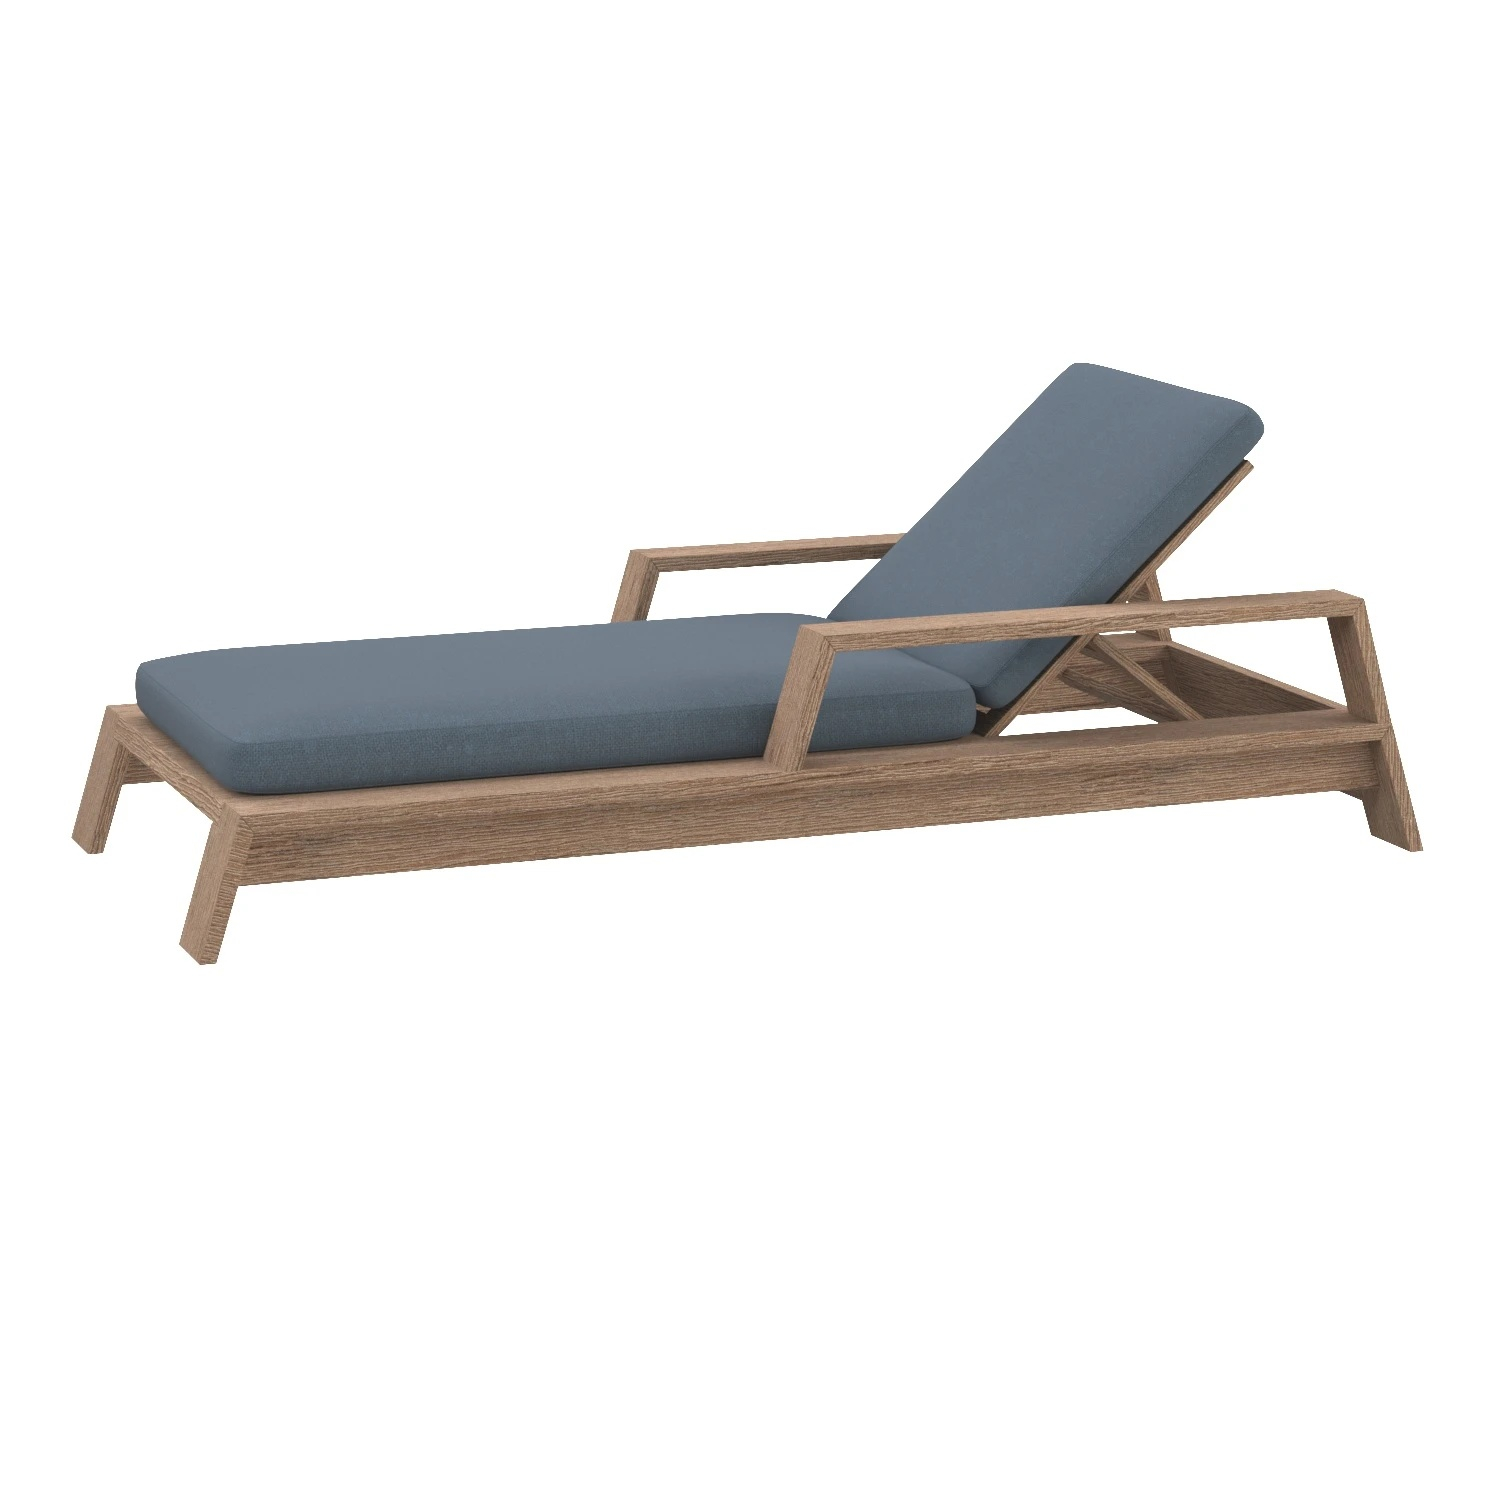 Collection of Four Modern Sun Lounger 3D Day Bed Models 3D Model_05